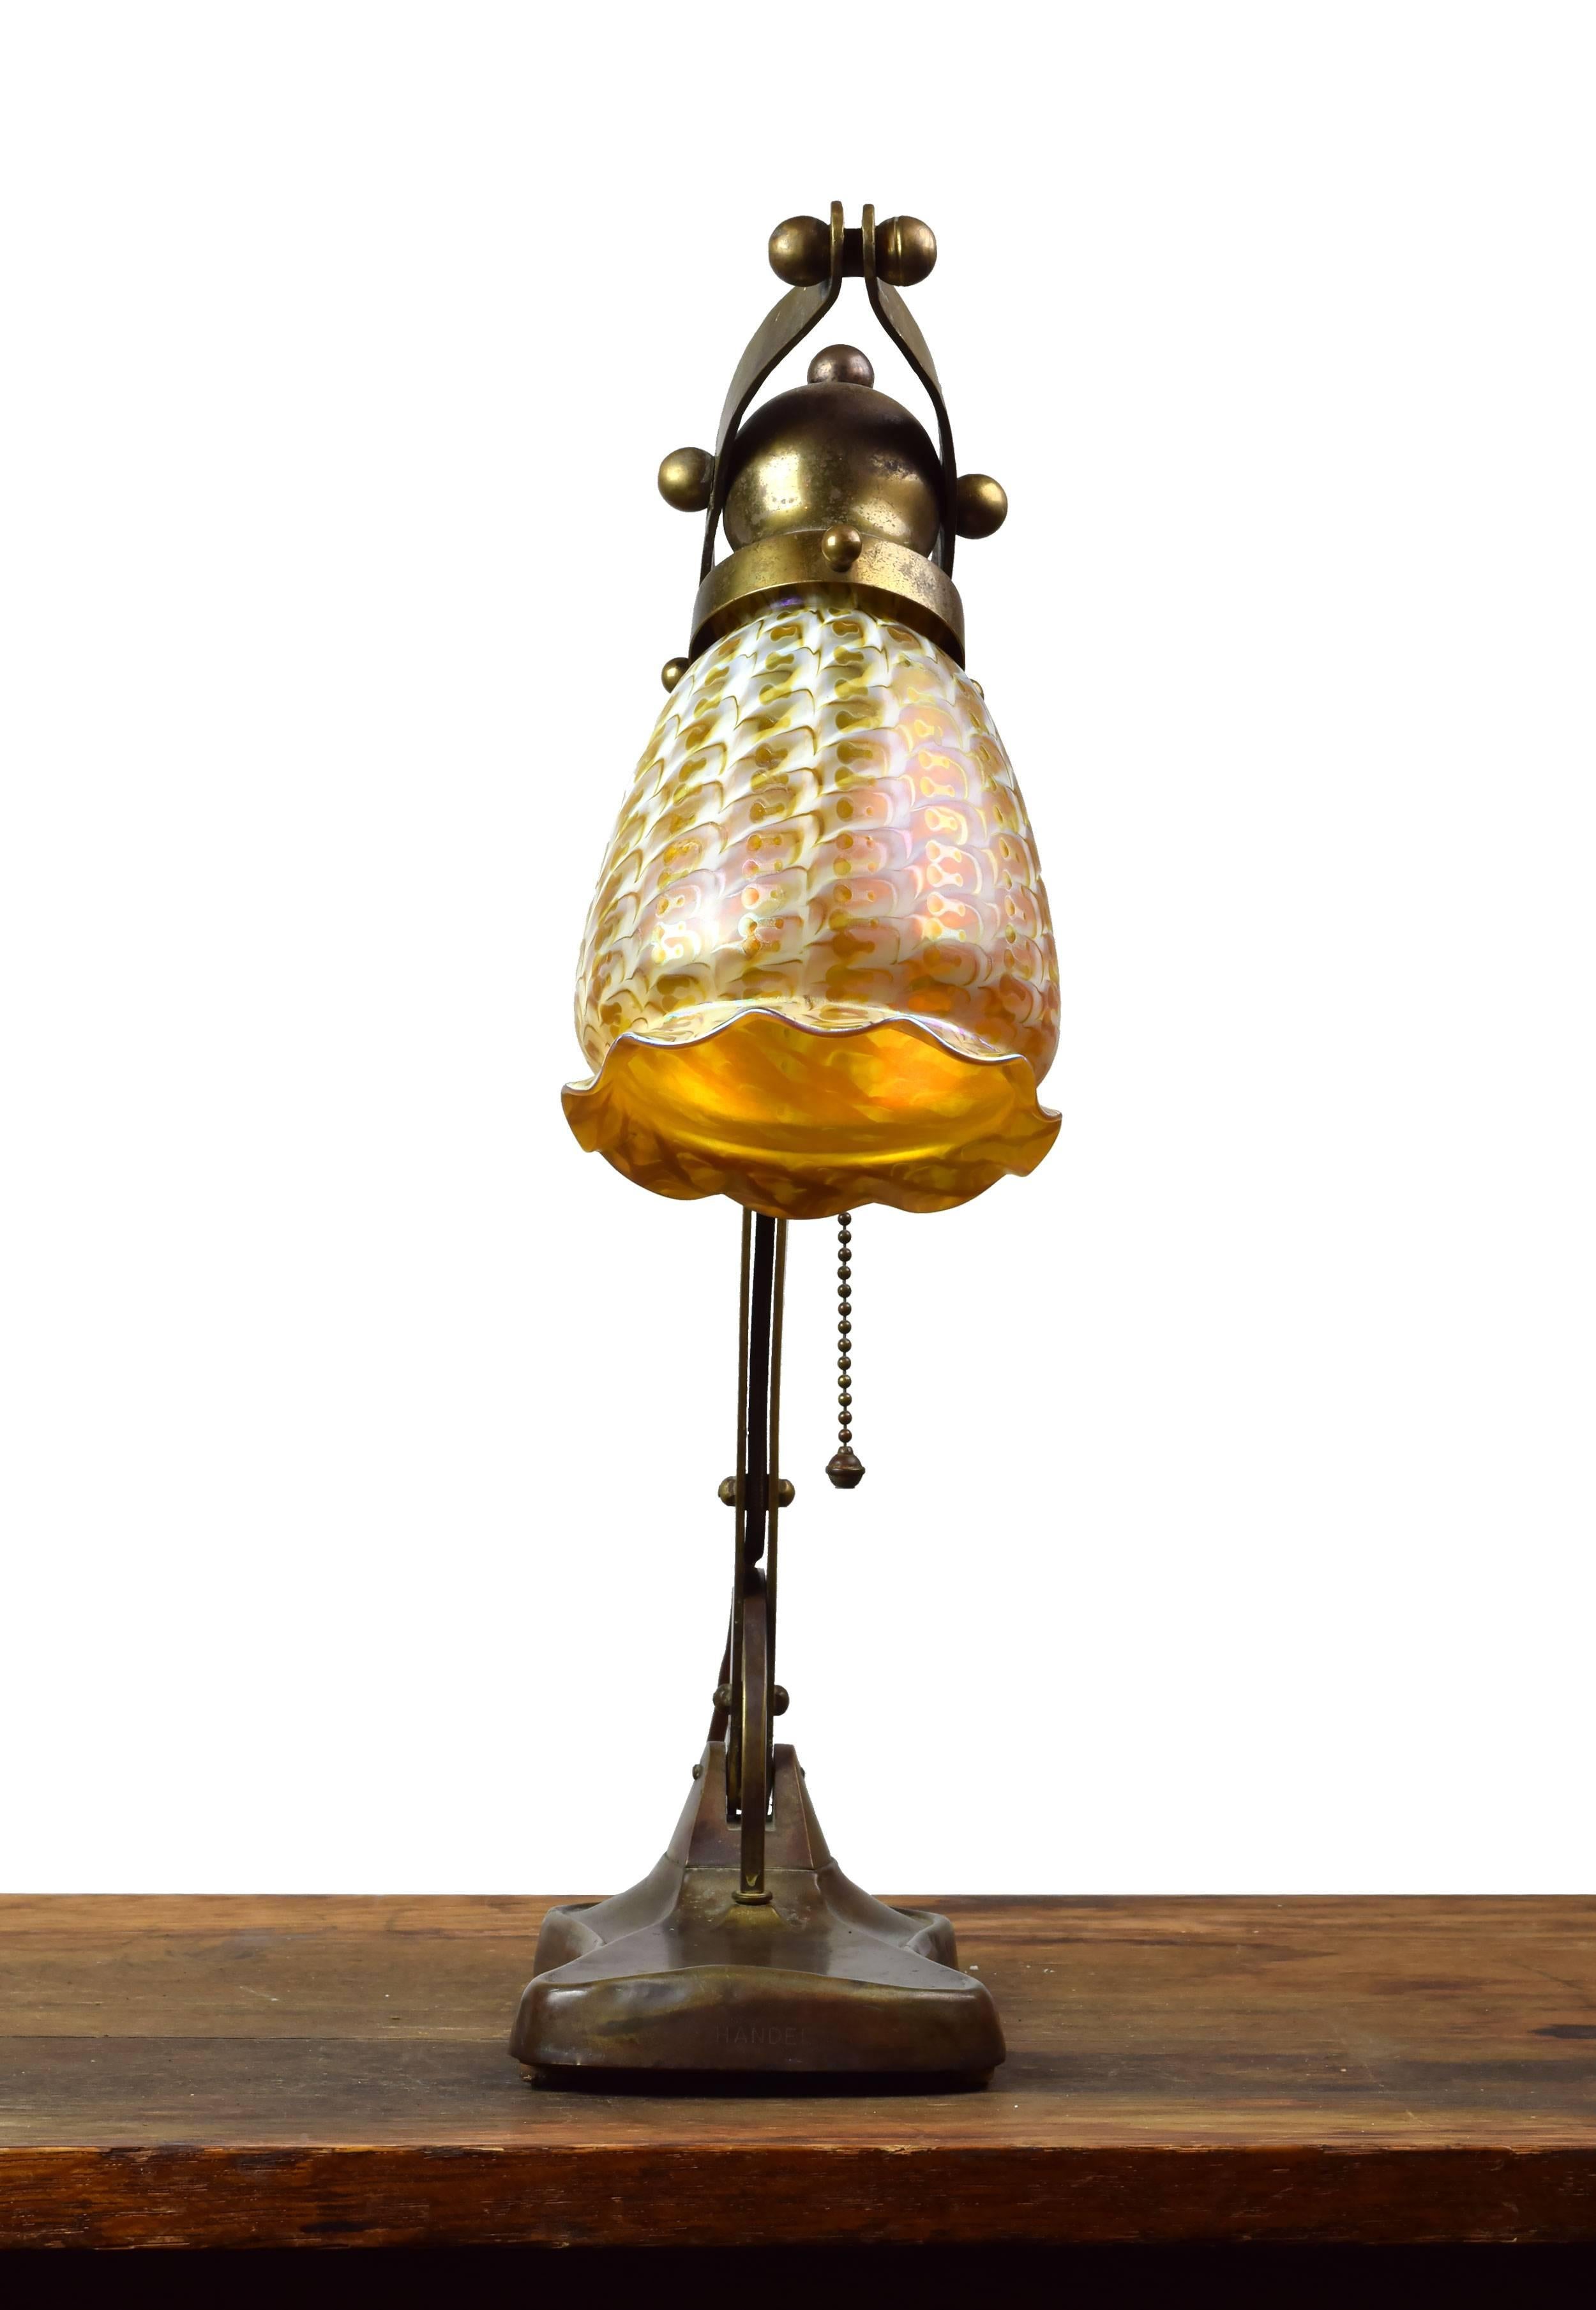 This beautiful cast brass table lamp was manufactured by Handel, one of the early 20th century's premier lighting companies. This fixture features an adjustable swinging arm, allowing you to alter the intensity of light as you see fit. The gently